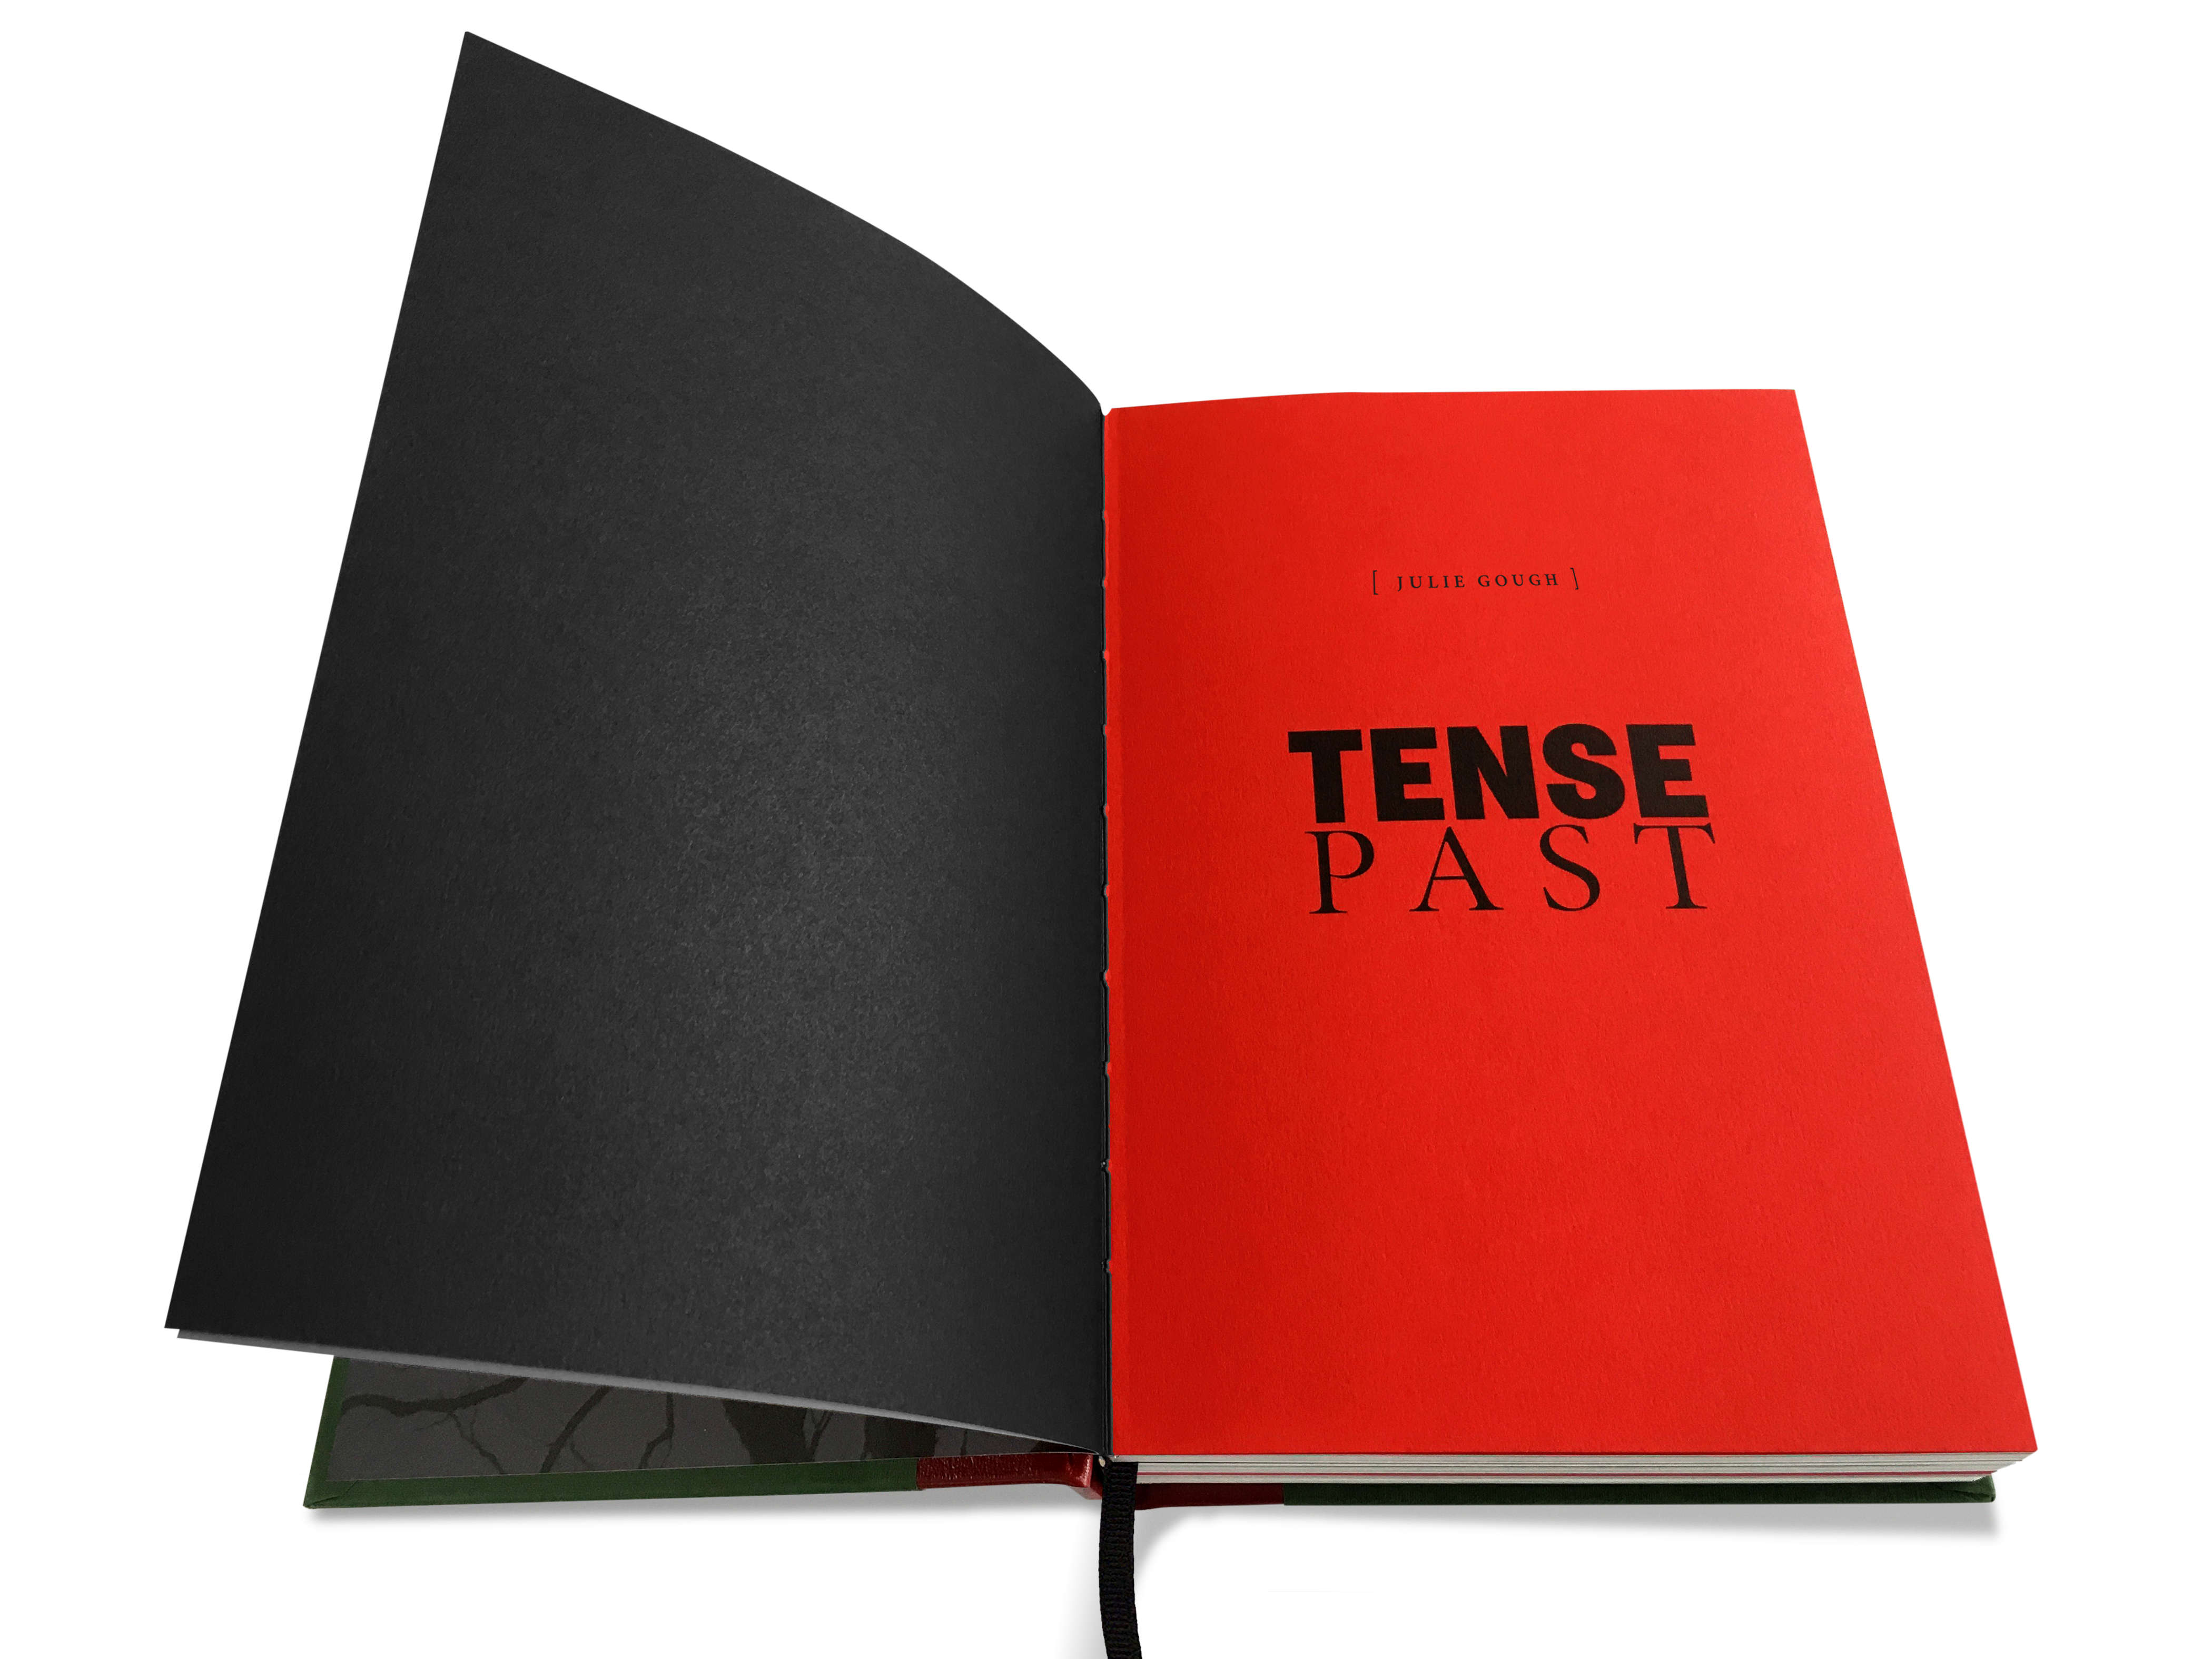 Image of a double-page spread from the TENSE PAST book. The left-hand page is black and the right hand page is red with the author’s name ‘Julie Gough’ and the title of the book ‘TENSE PAST’.